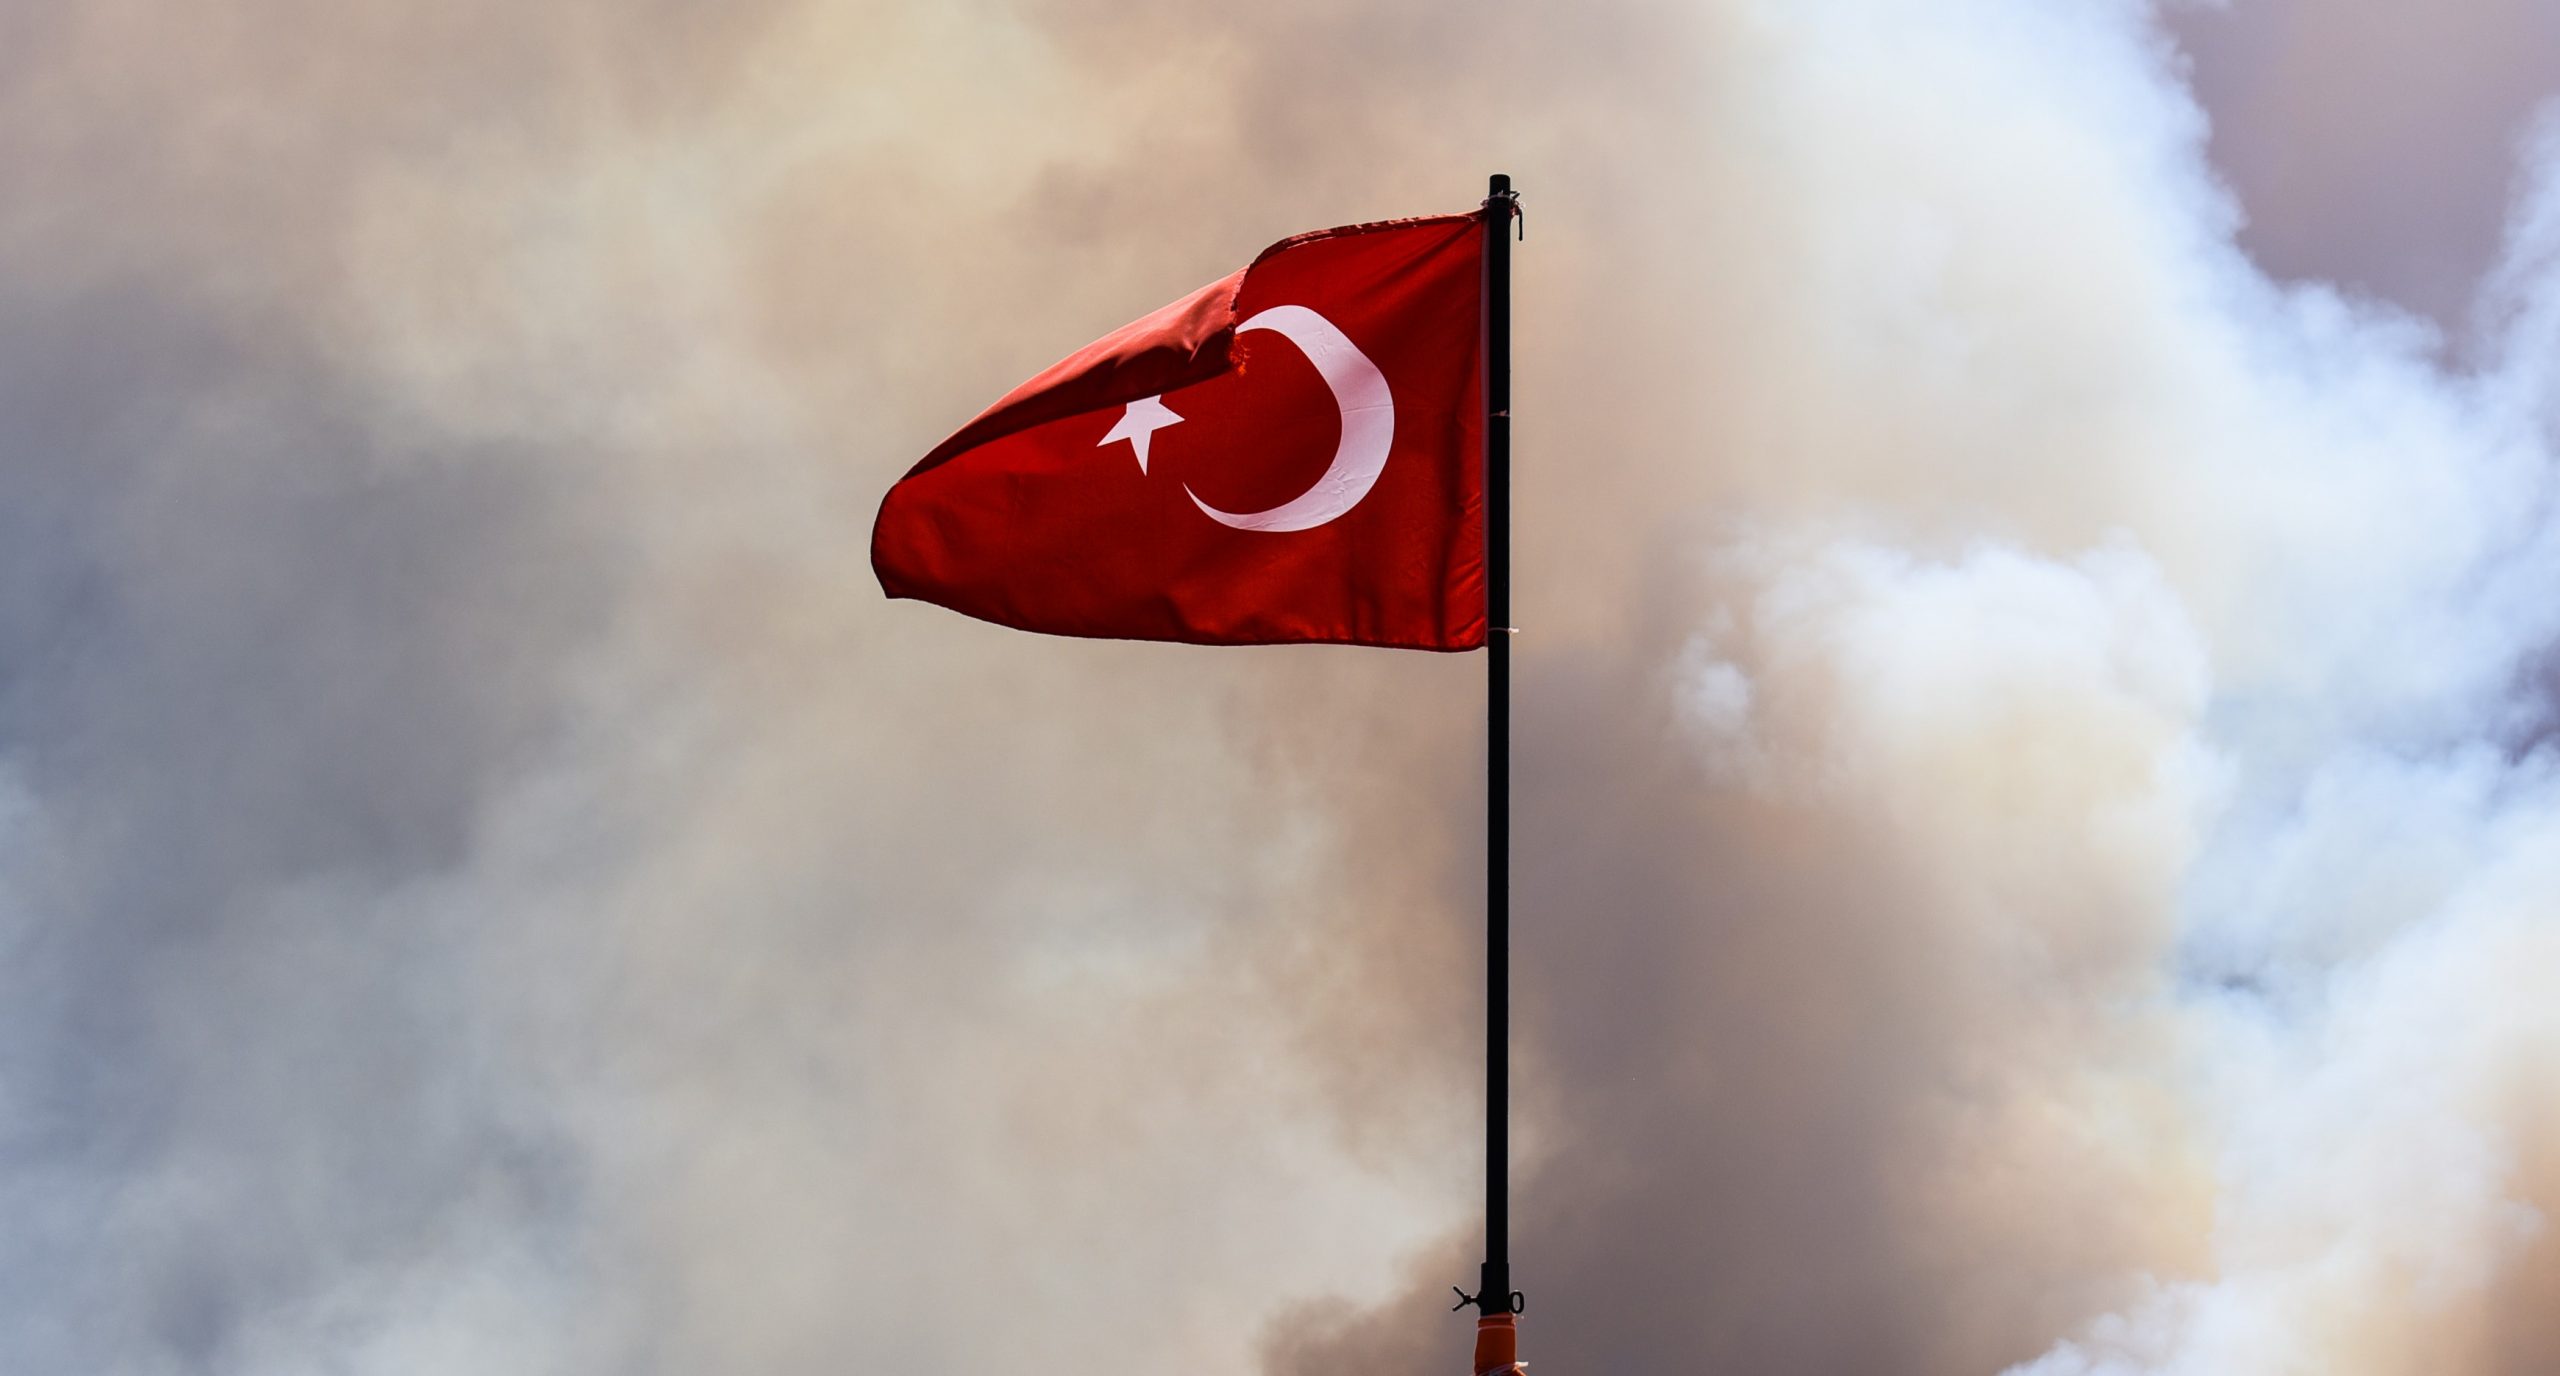 How Natural Disasters Deepened the Conflict Between the Turkish Regime and the Opposition